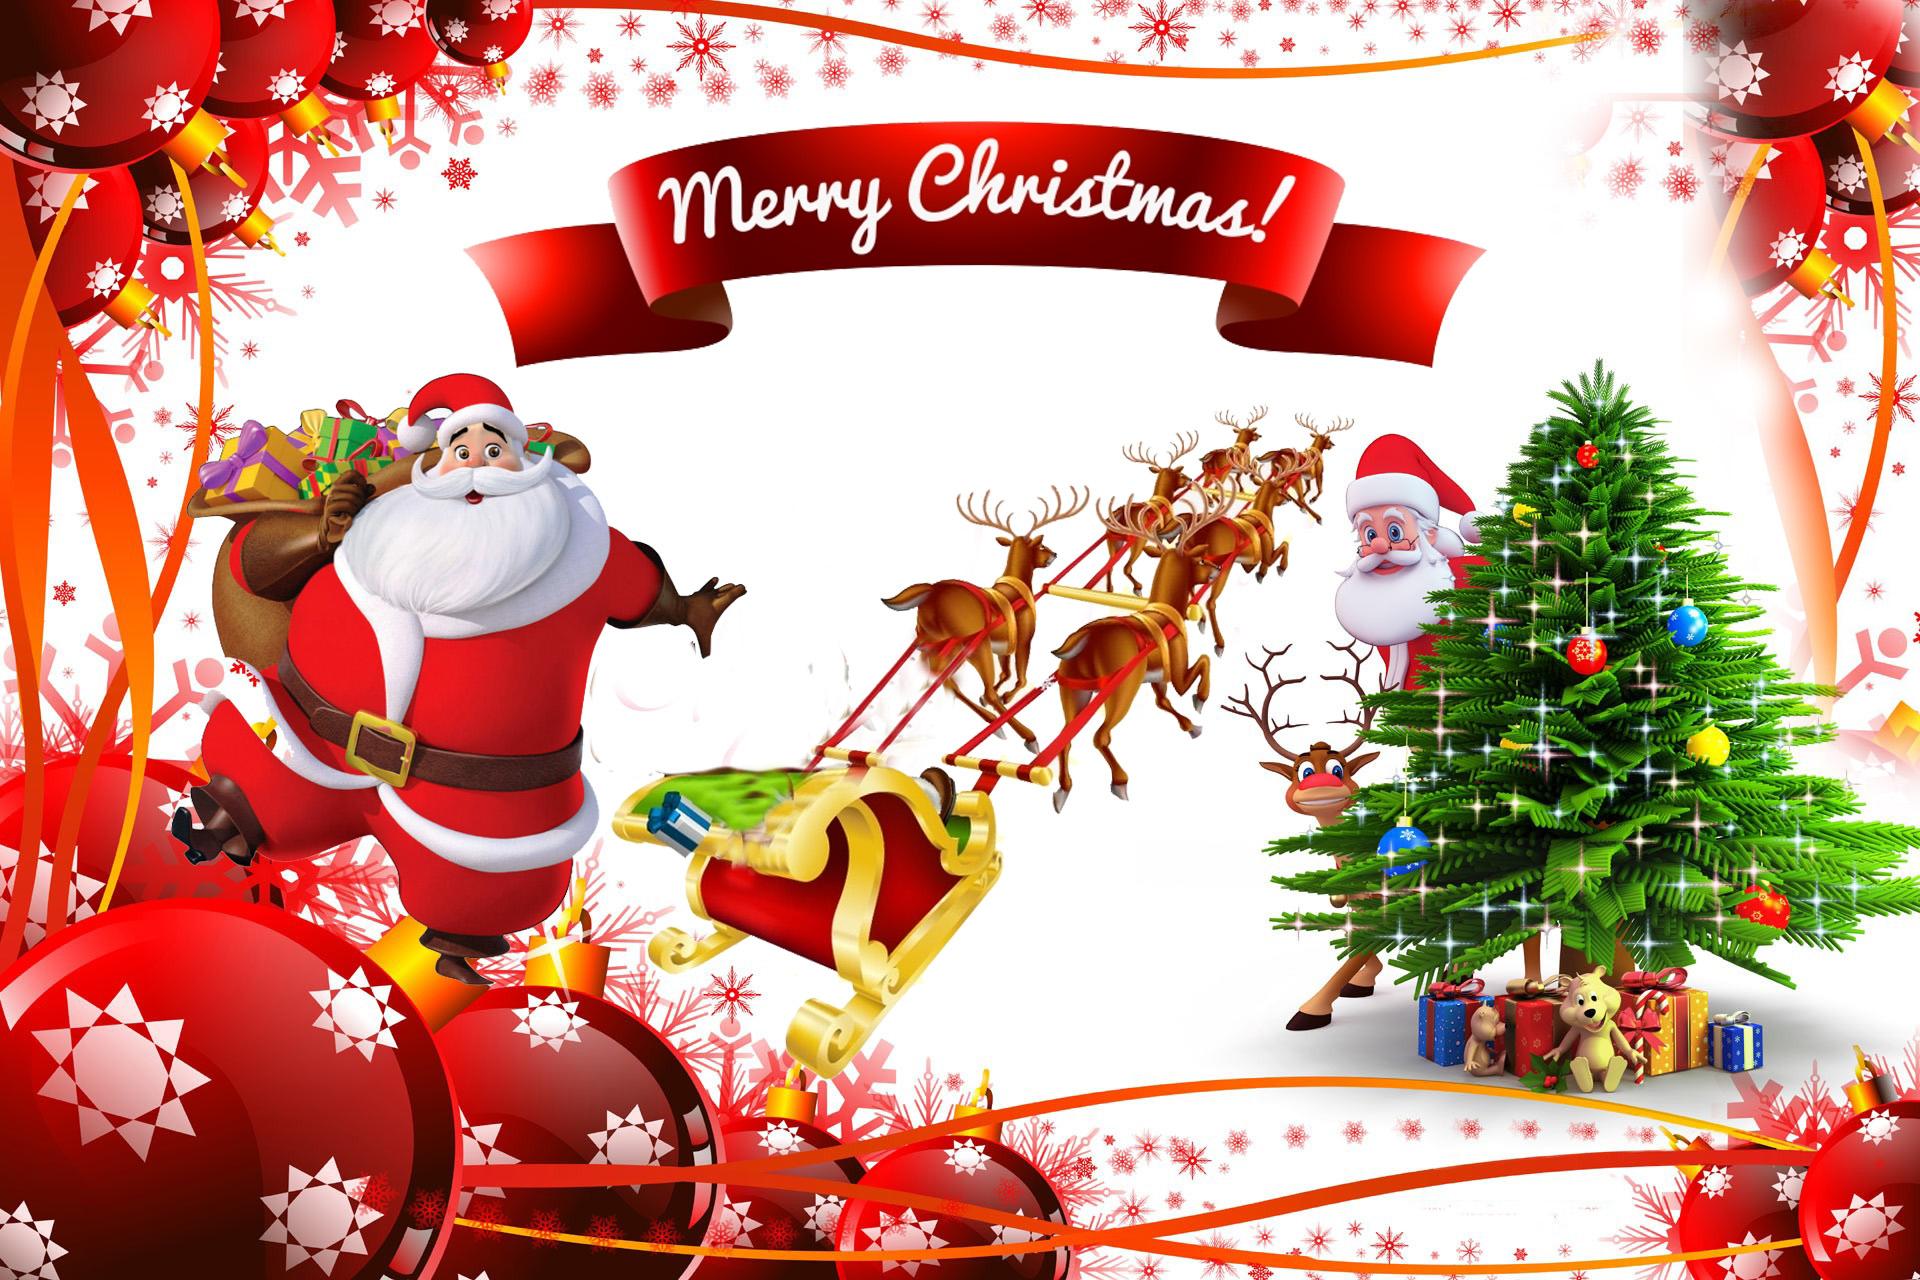 ▷Merry Christmas 2020 Image. HD【Wallpaper Picture Wishes